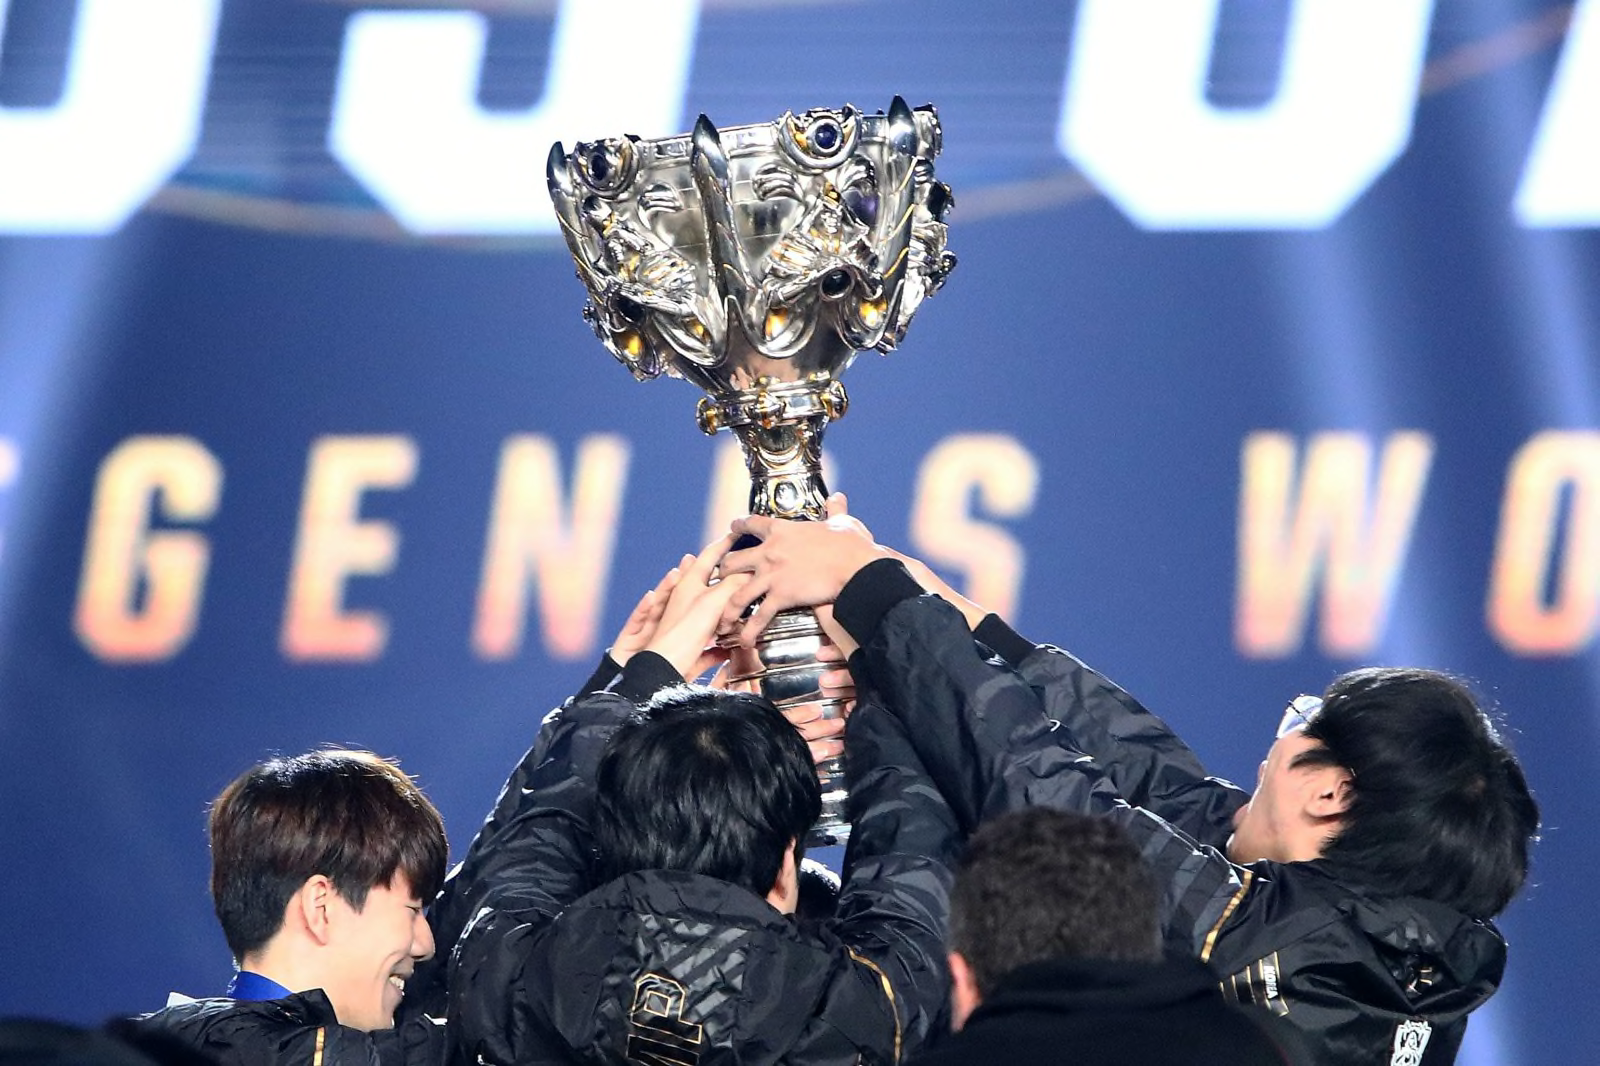 Invictus Gaming Wins 'League of Legends' World Championship